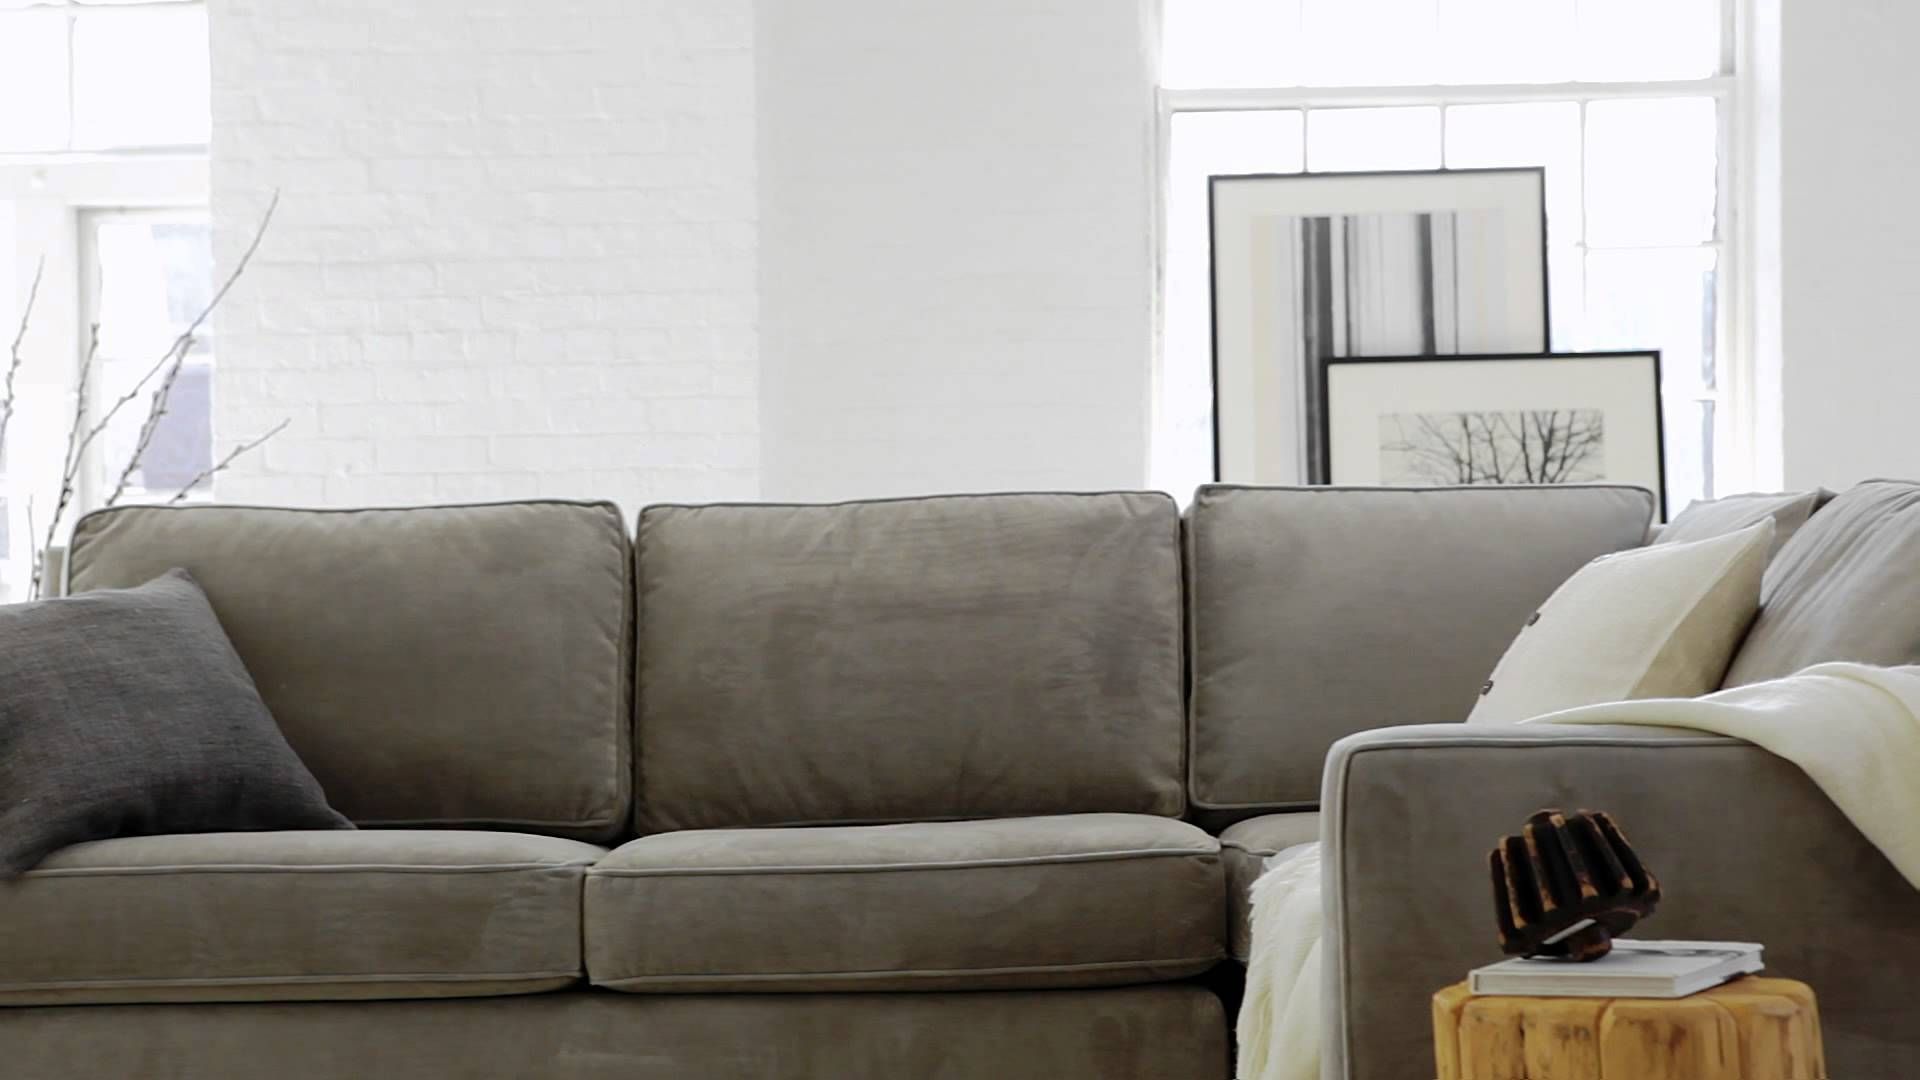 Furniture: West Elm Henry Sectional Reviews | Tillary Sofa | West For West Elm Henry Sectional Sofas (View 1 of 15)